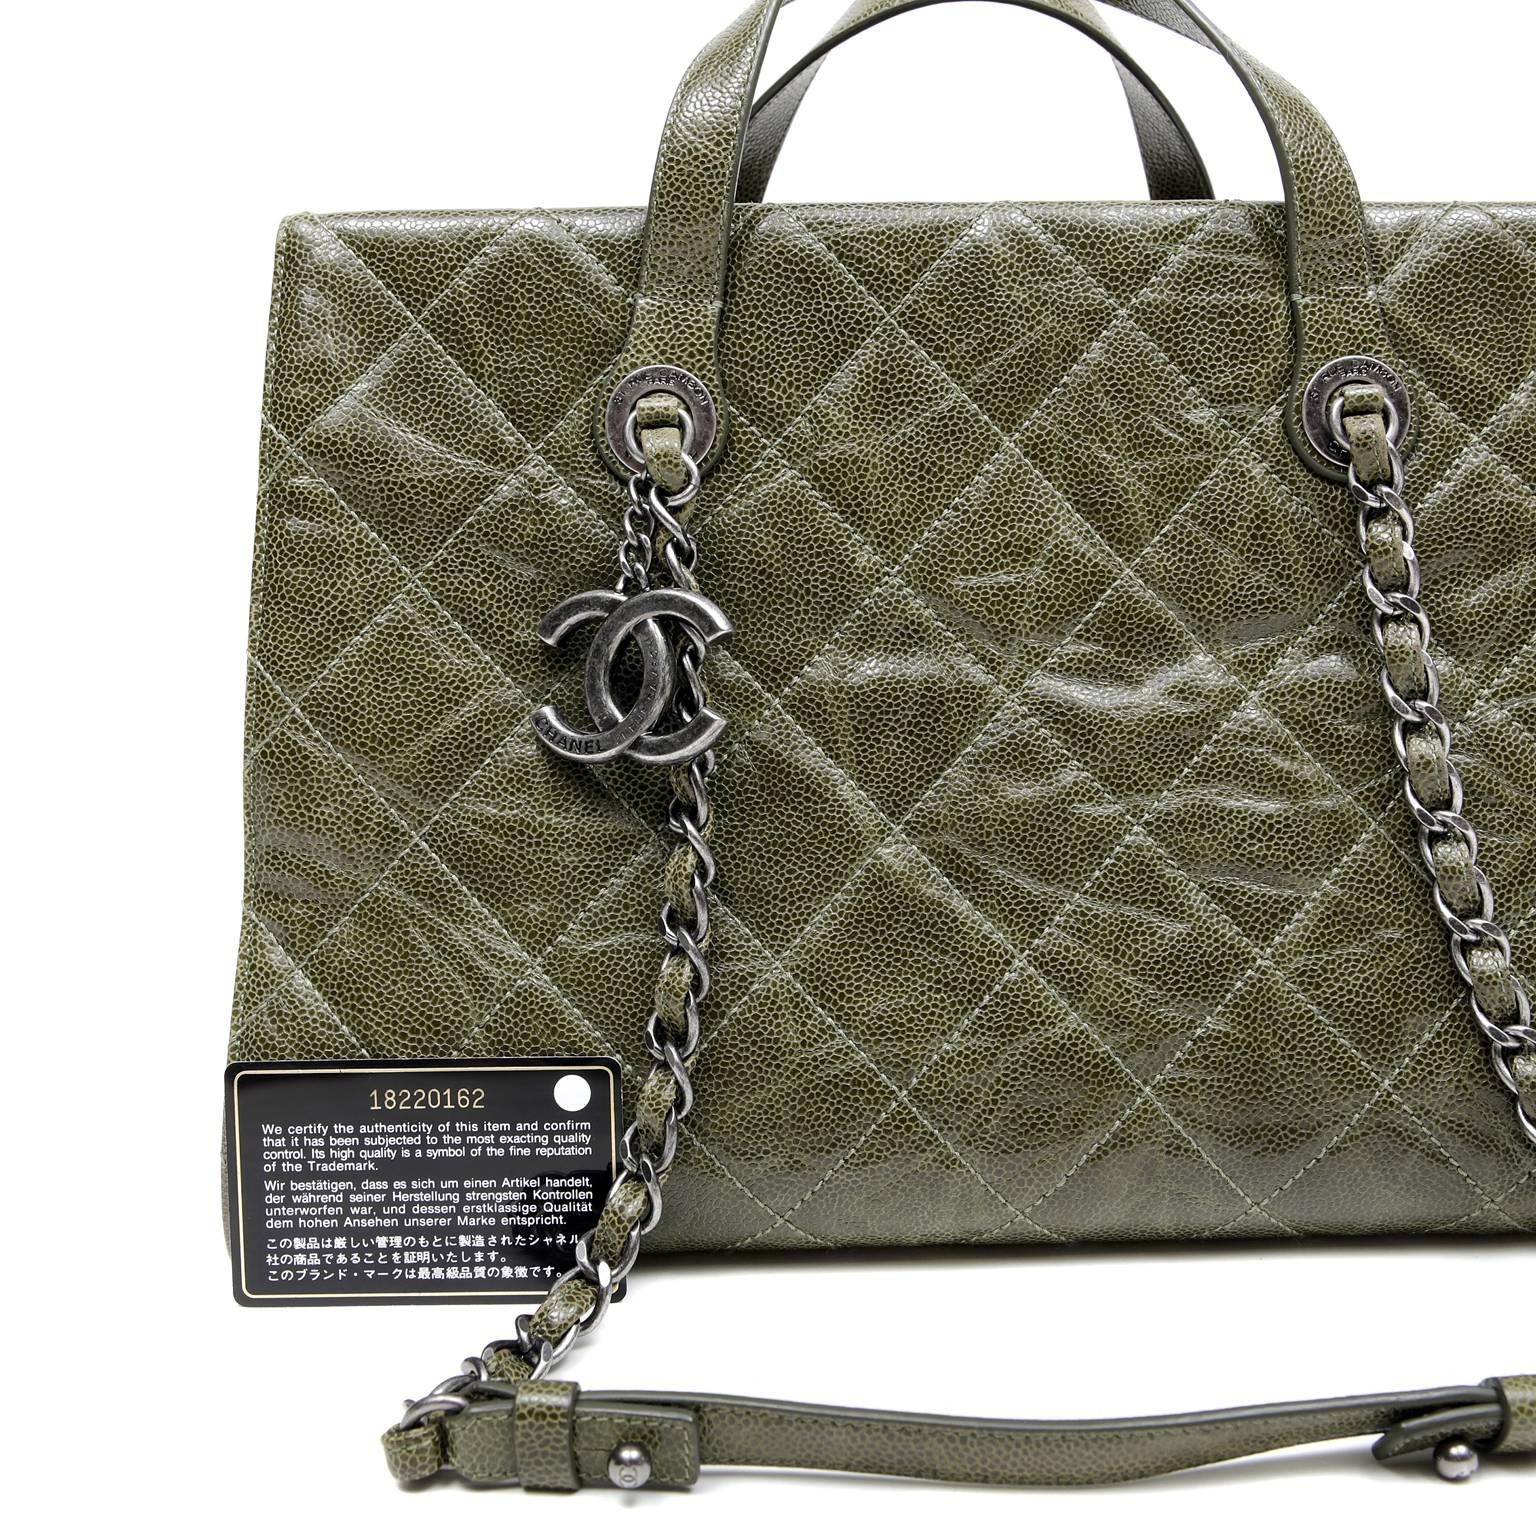 Chanel Olive Green Caviar Leather Crave Tote Bag For Sale 2